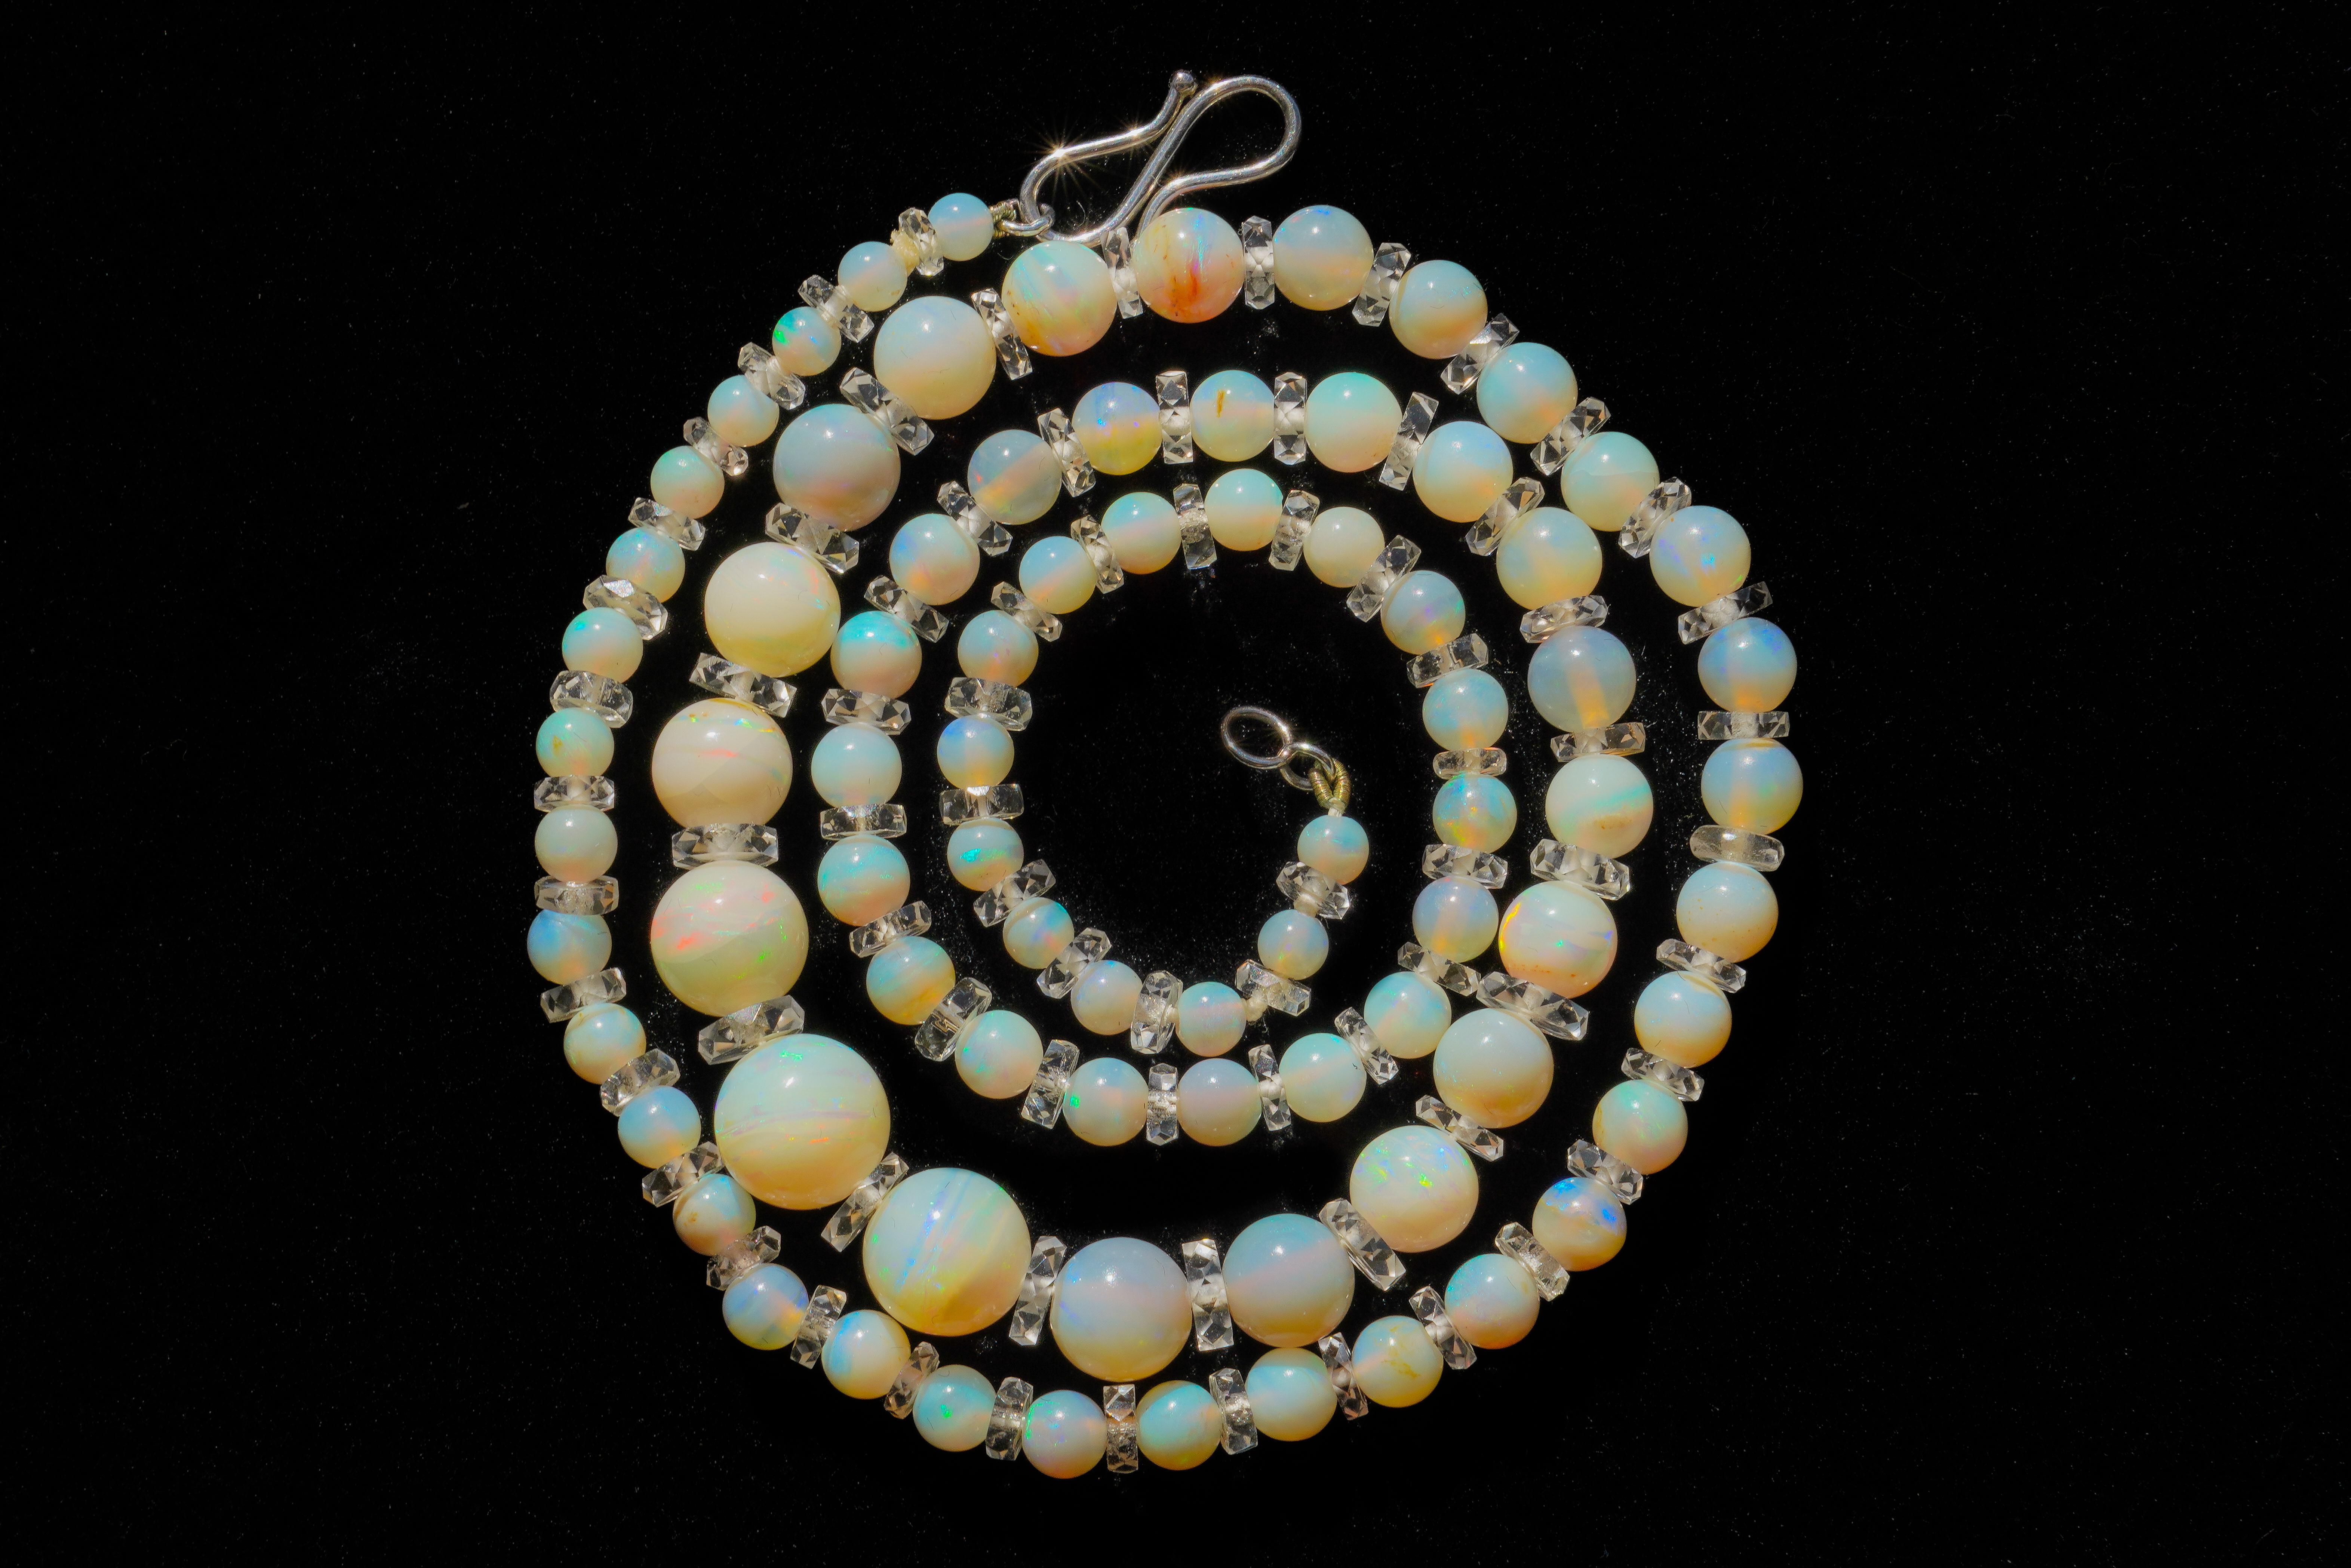 AN OPAL BEAD AND ROCK CRYSTAL NECKLACE - Image 14 of 15